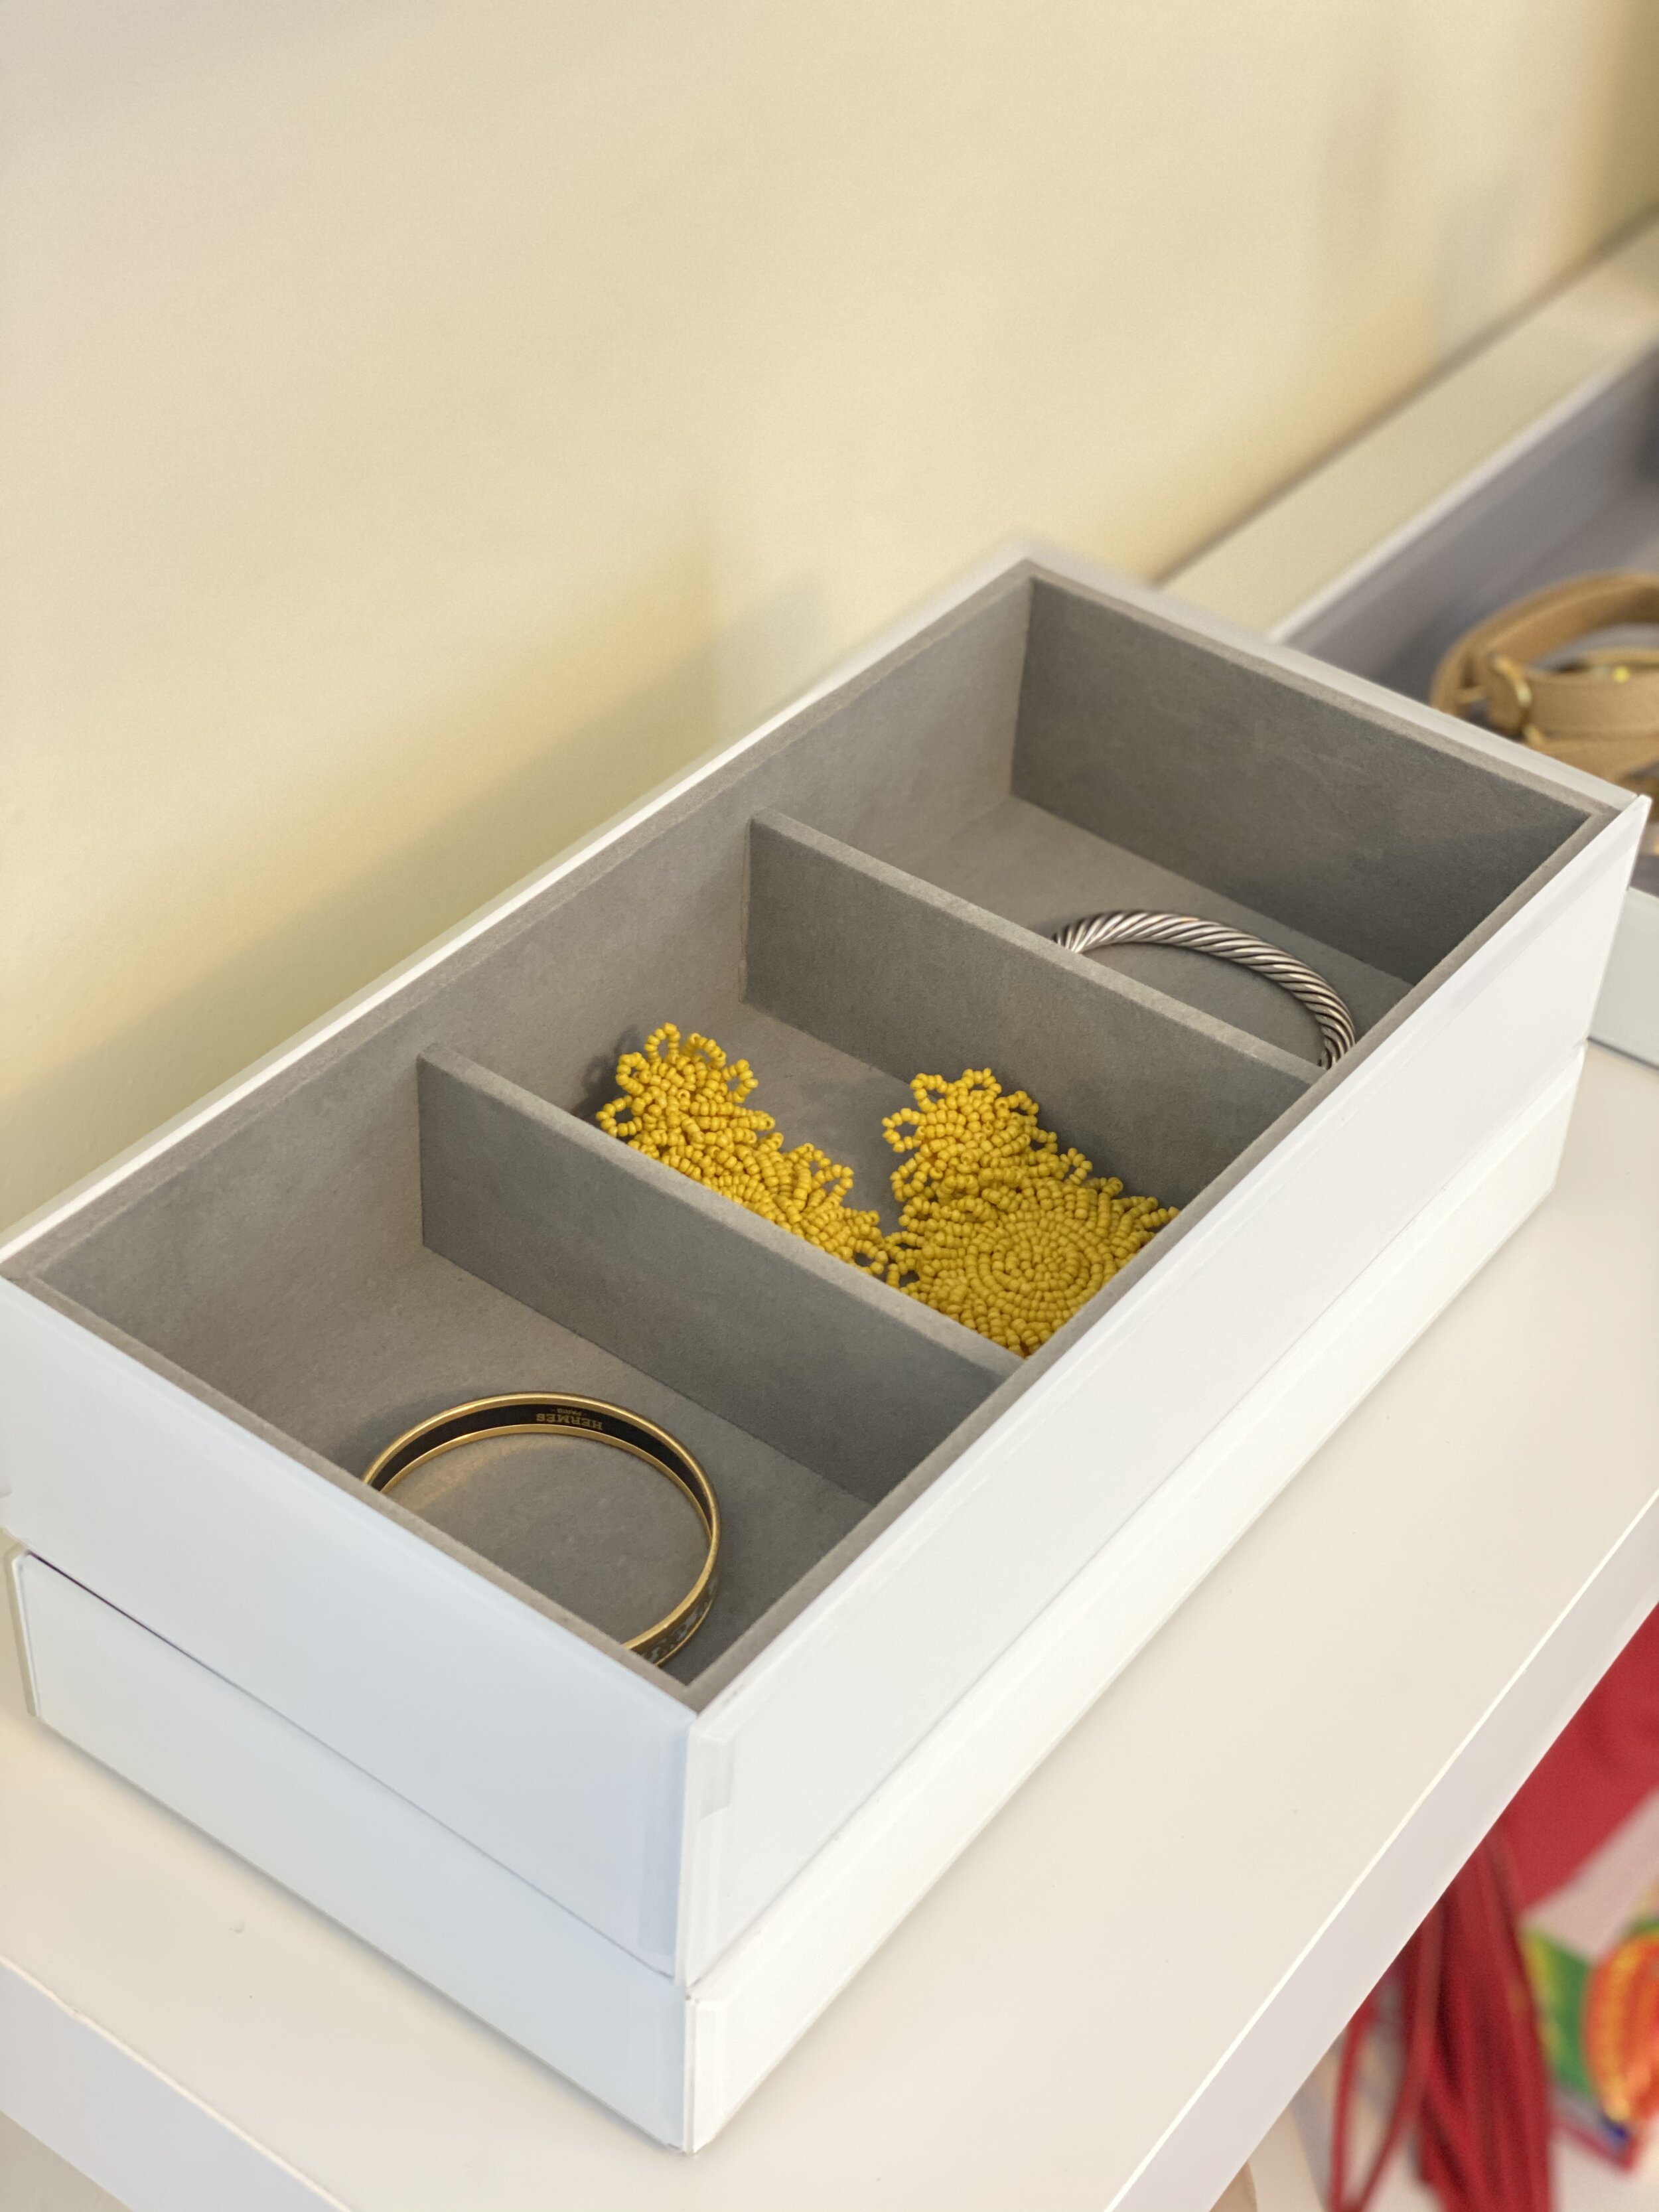 HERMES Jewelry Boxes & Organizers